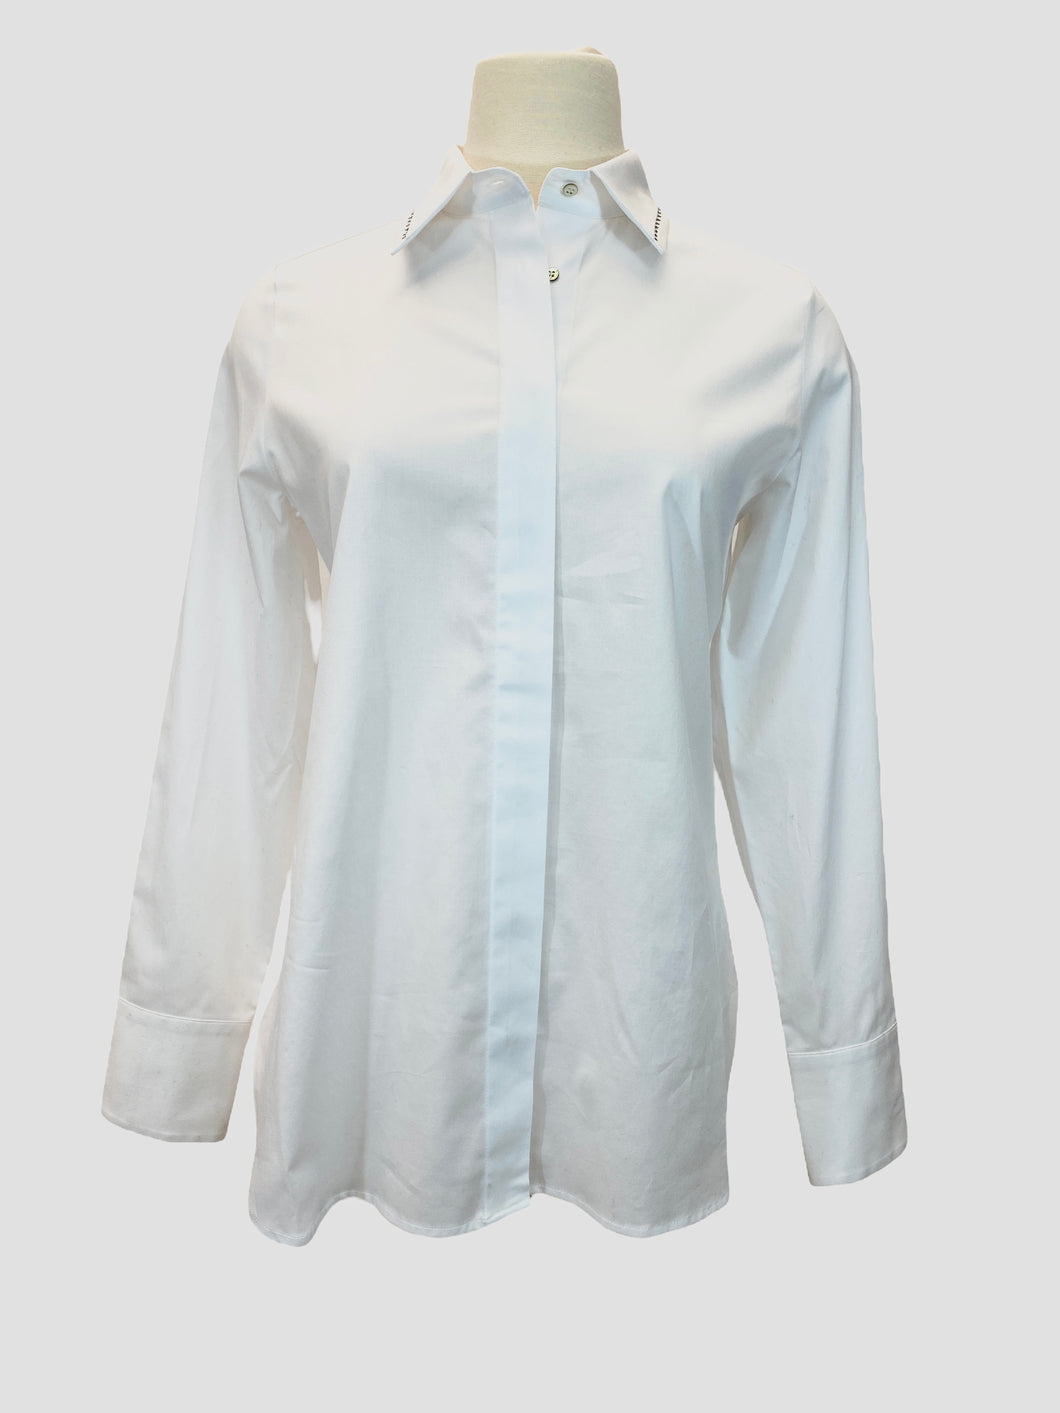 Tonet Cotton Long Sleeve Shirt with Embellished Collar